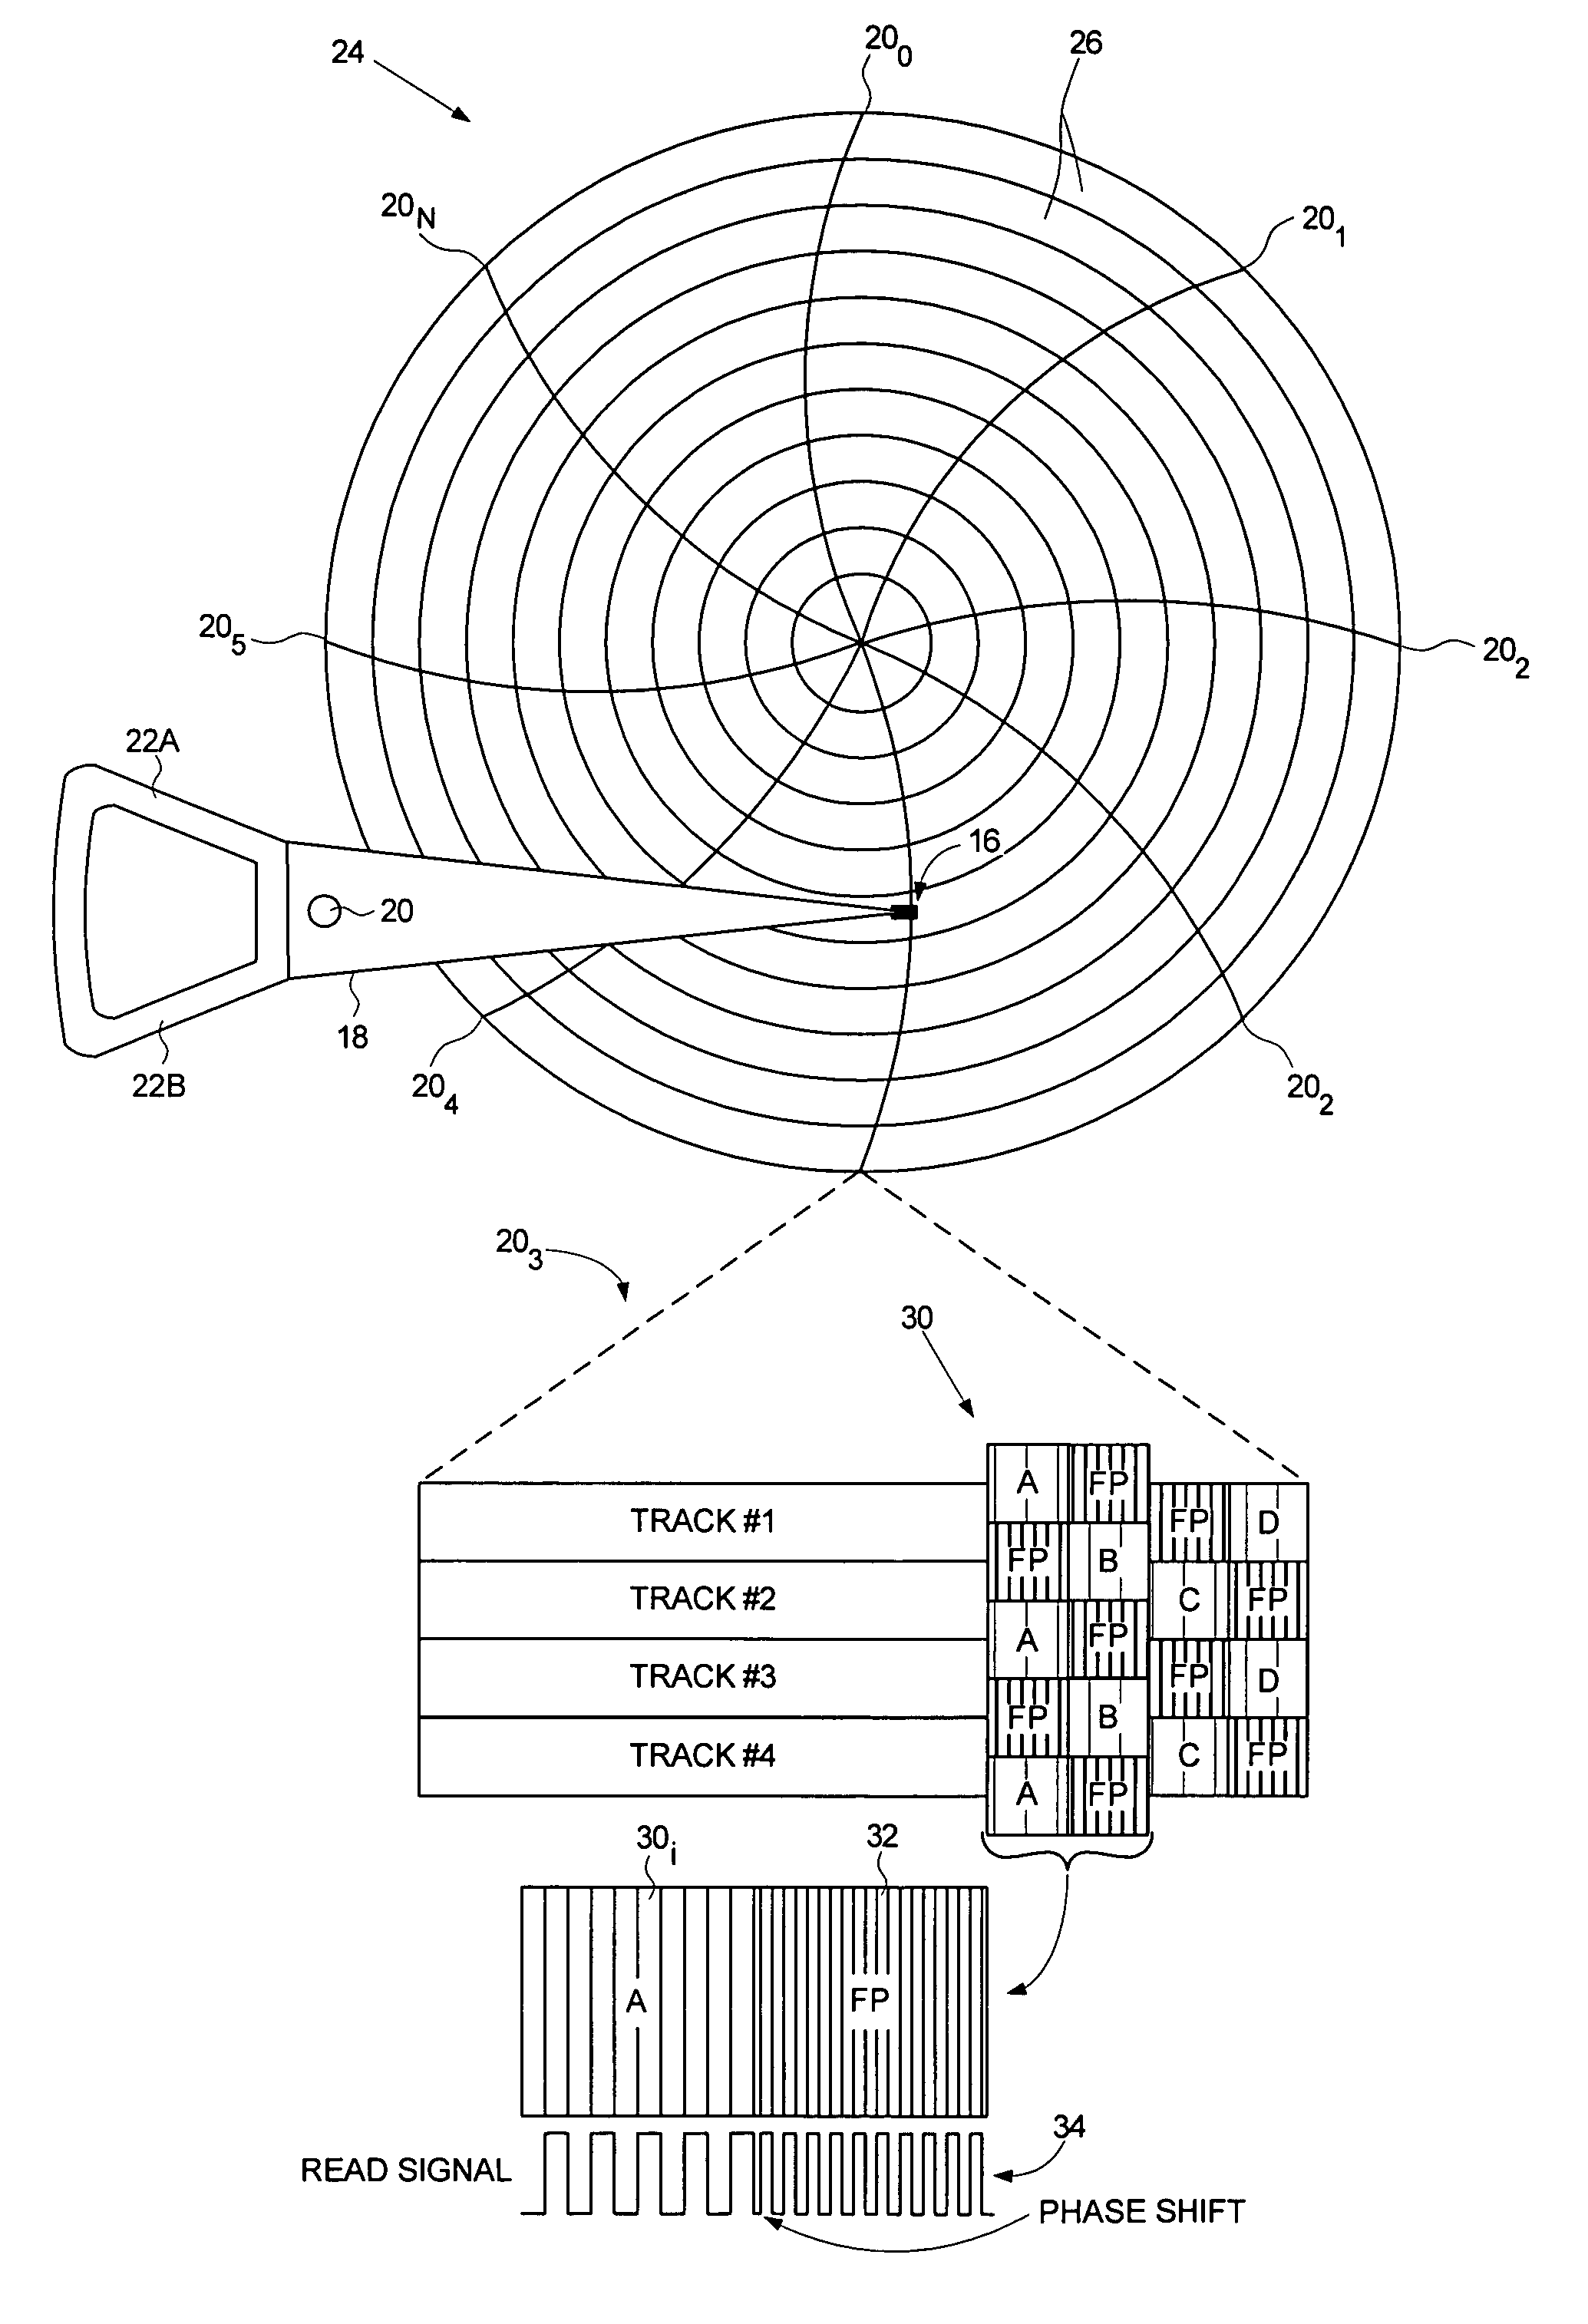 Servo writing a disk drive by overwriting a harmonic frequency fill pattern in the servo burst area